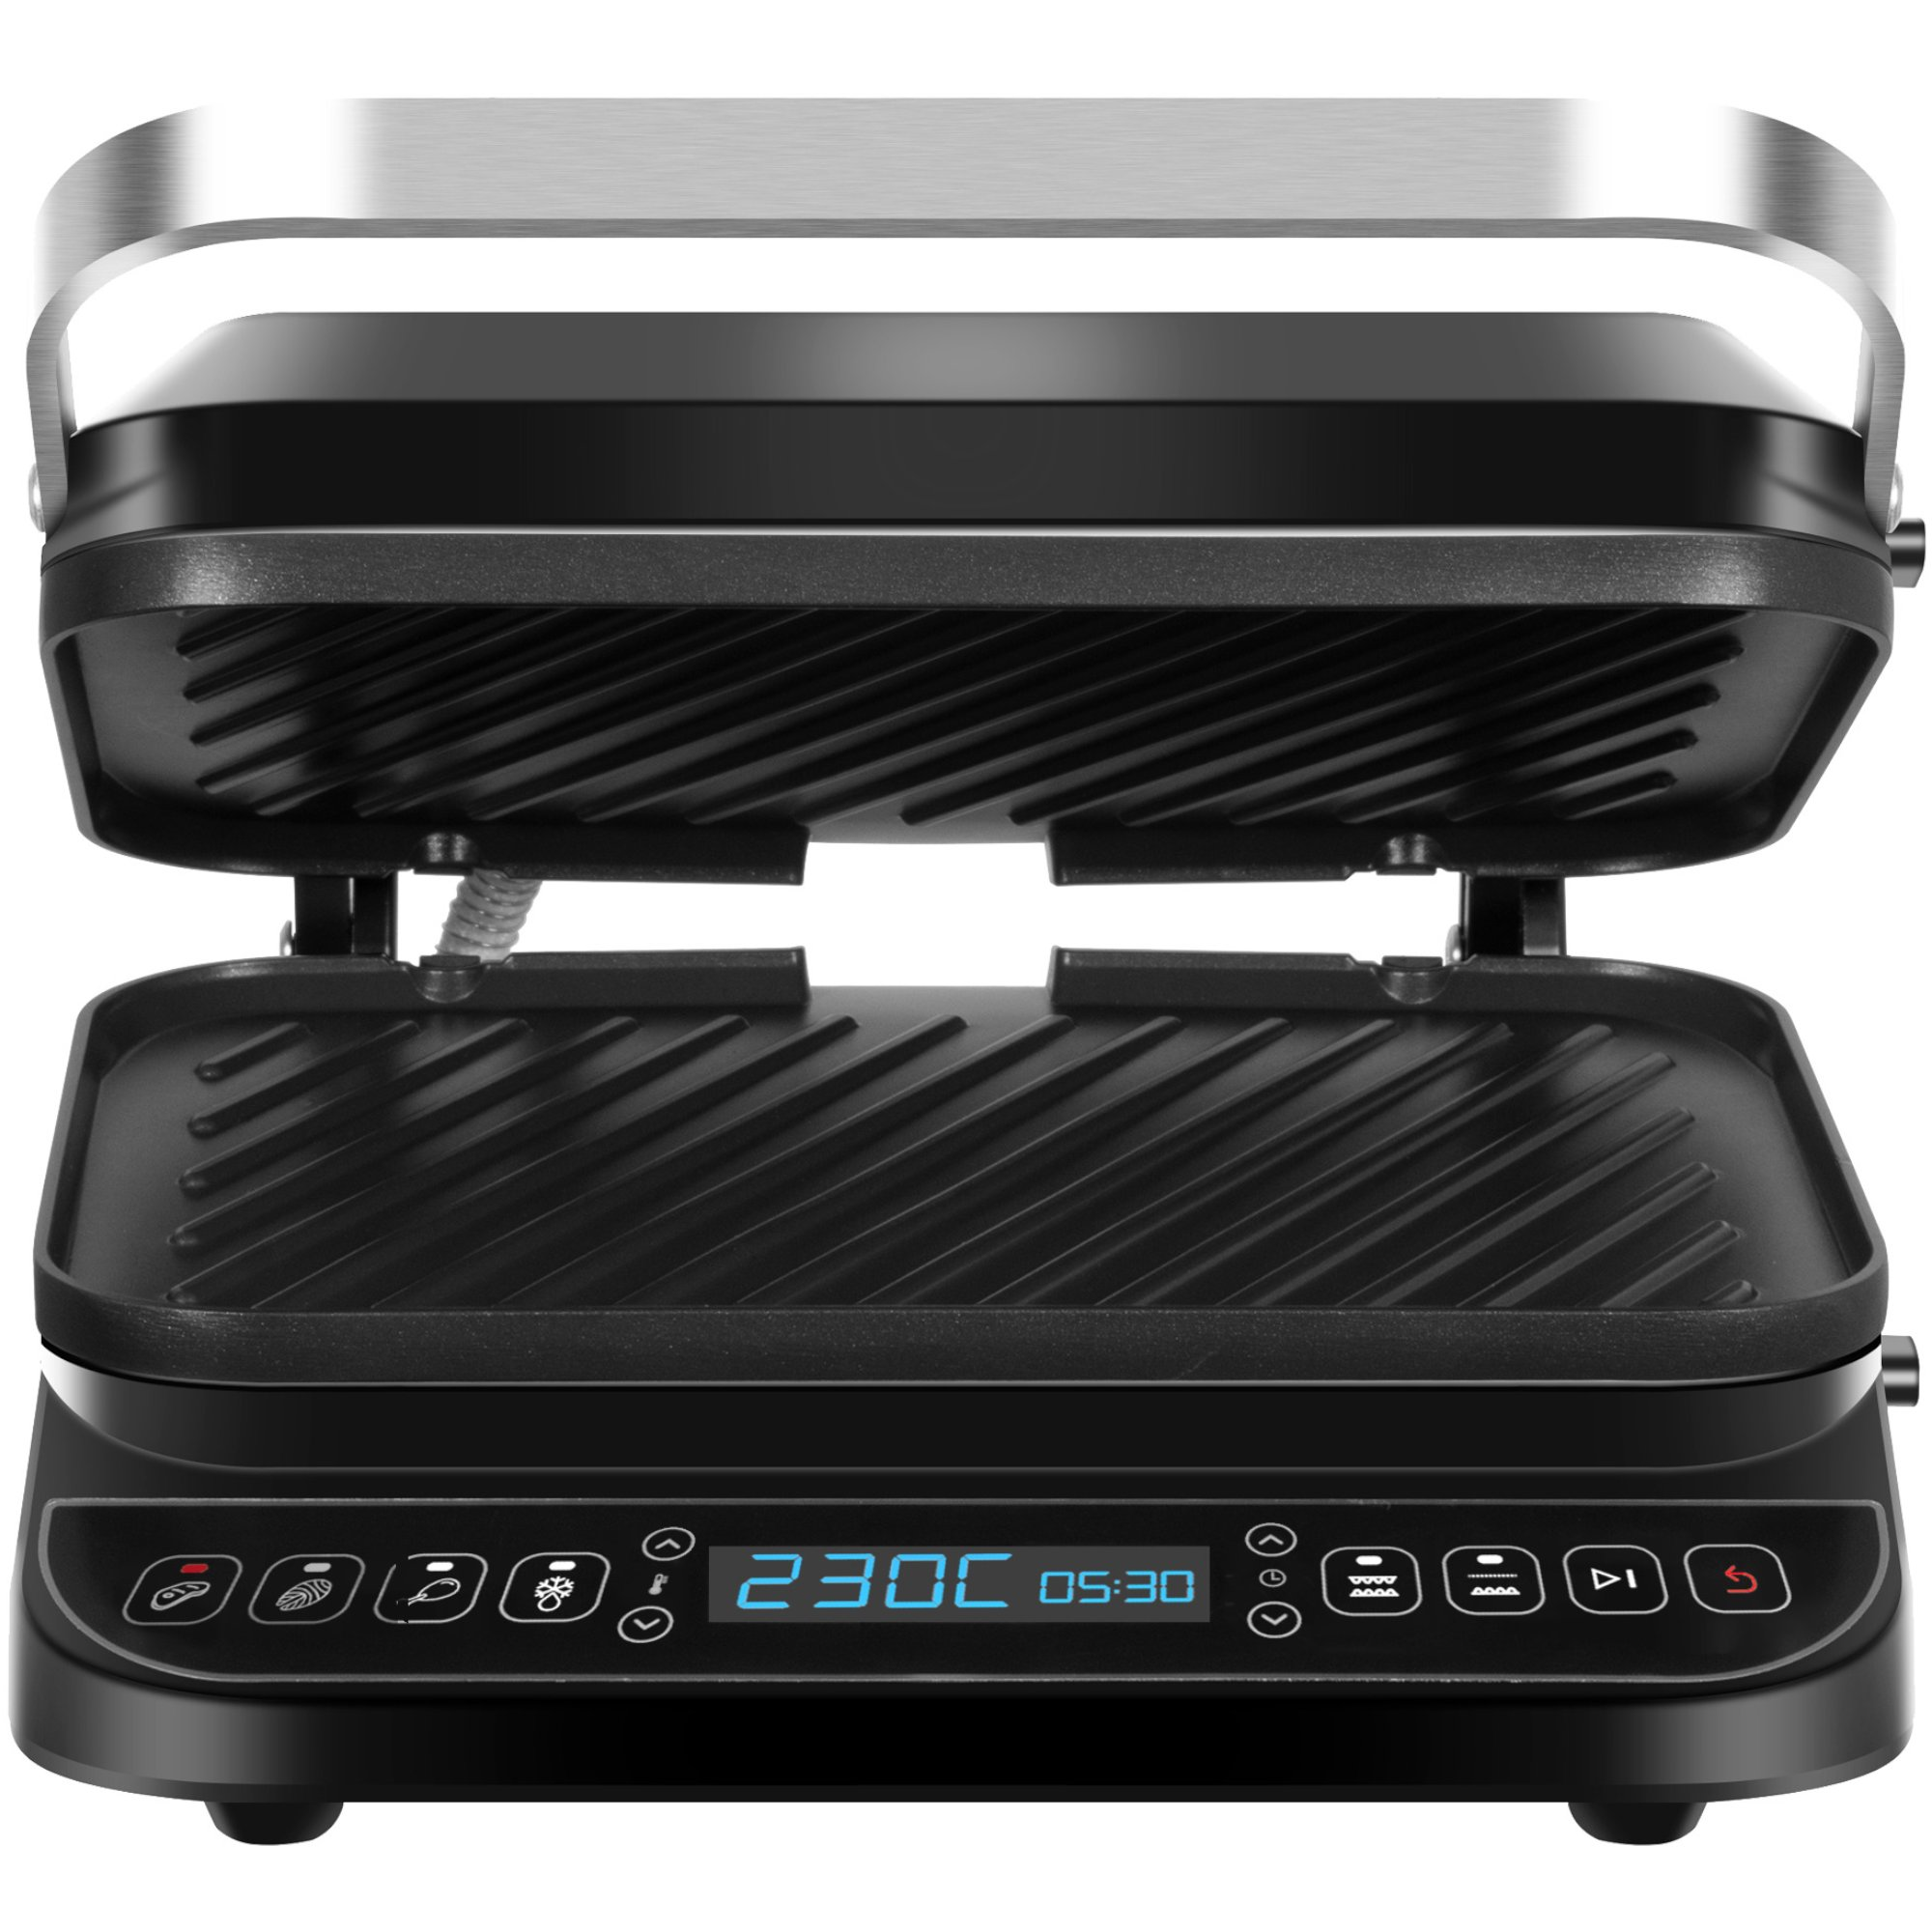 Z-LINE TT-CG900-Silber Silver TURBOTRONIC Tischgrill, BY